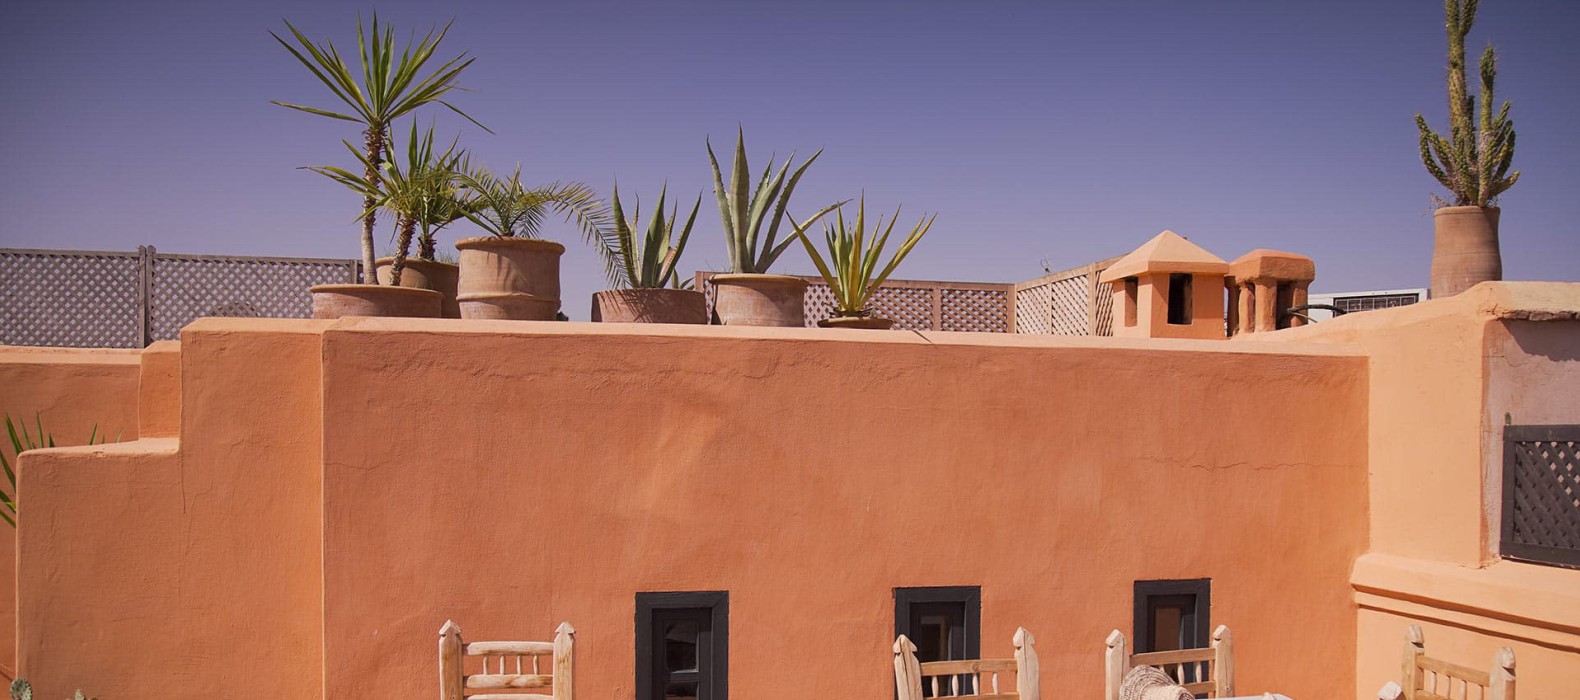 Rooftop dining area view of Riad Knizou in Marrakech